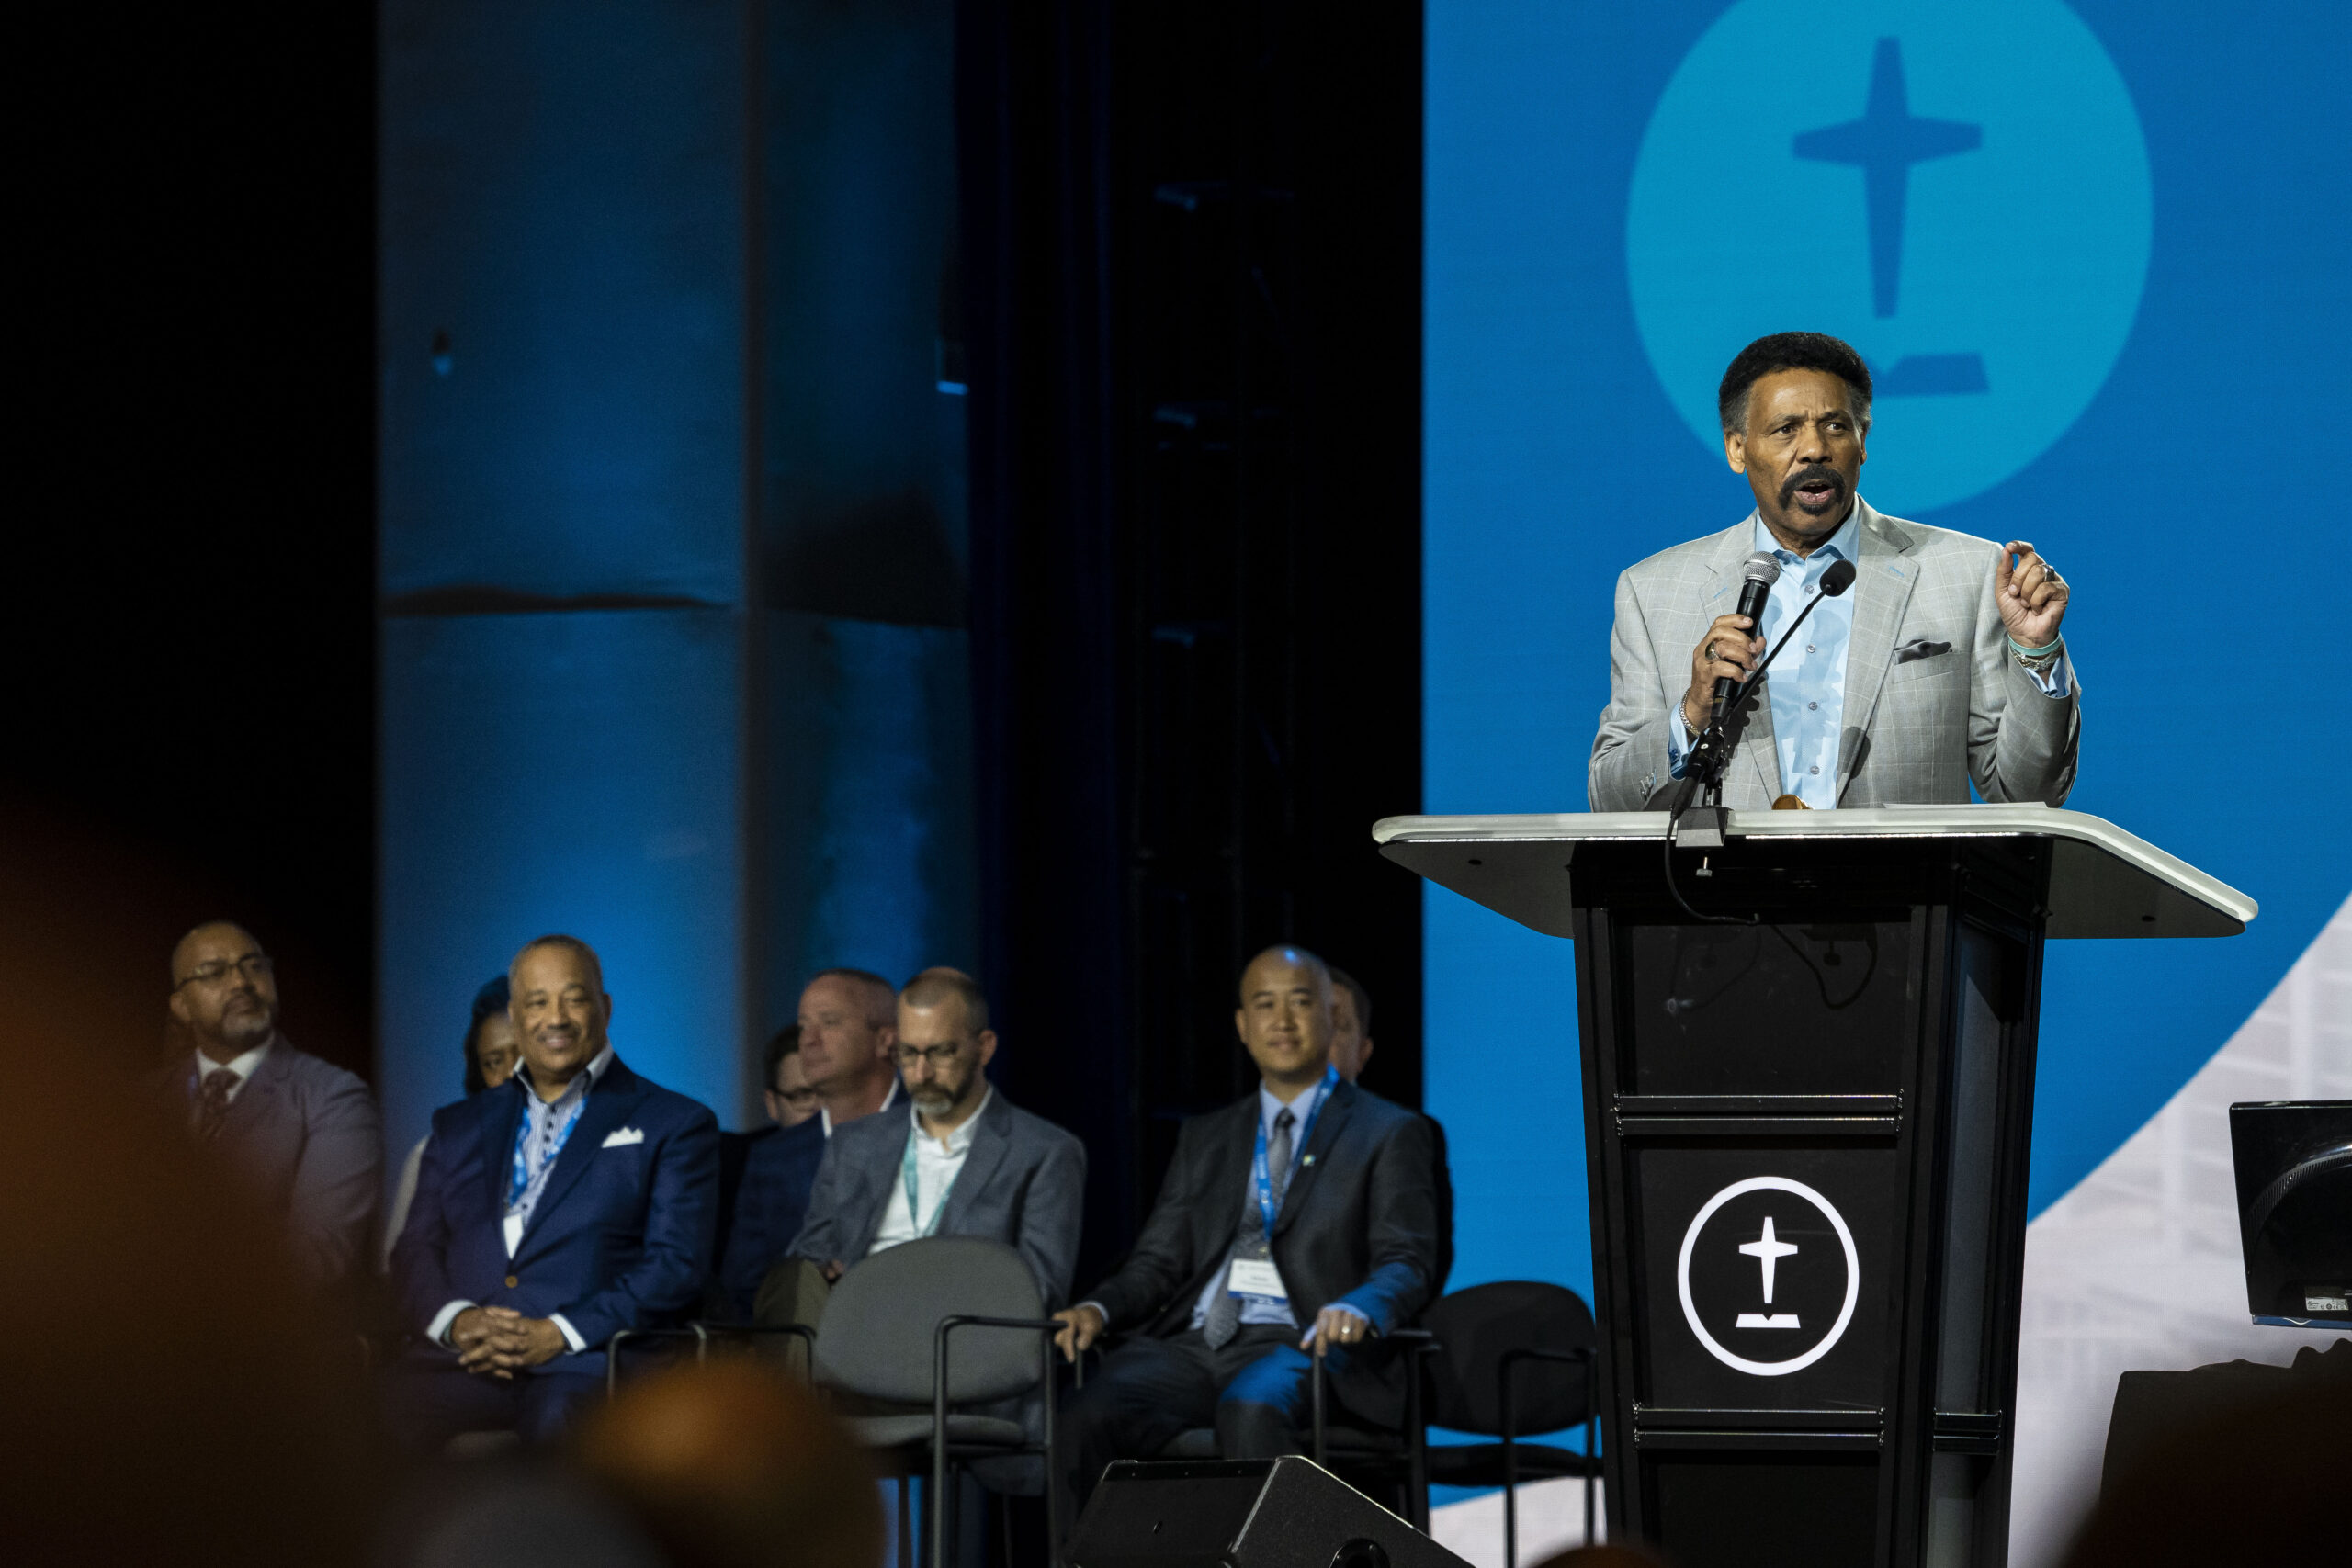 Tony Evans speaks on stage during the Jesus, the Center of Racial Reconciliation: Adopting a Kingdom Race Mindset segment at the Southern Baptist Convention annual meeting, held at the Anaheim Convention Center in Anaheim, California, on Wednesday, June 15, 2022. Photo by Justin L. Stewart/Religion News Service